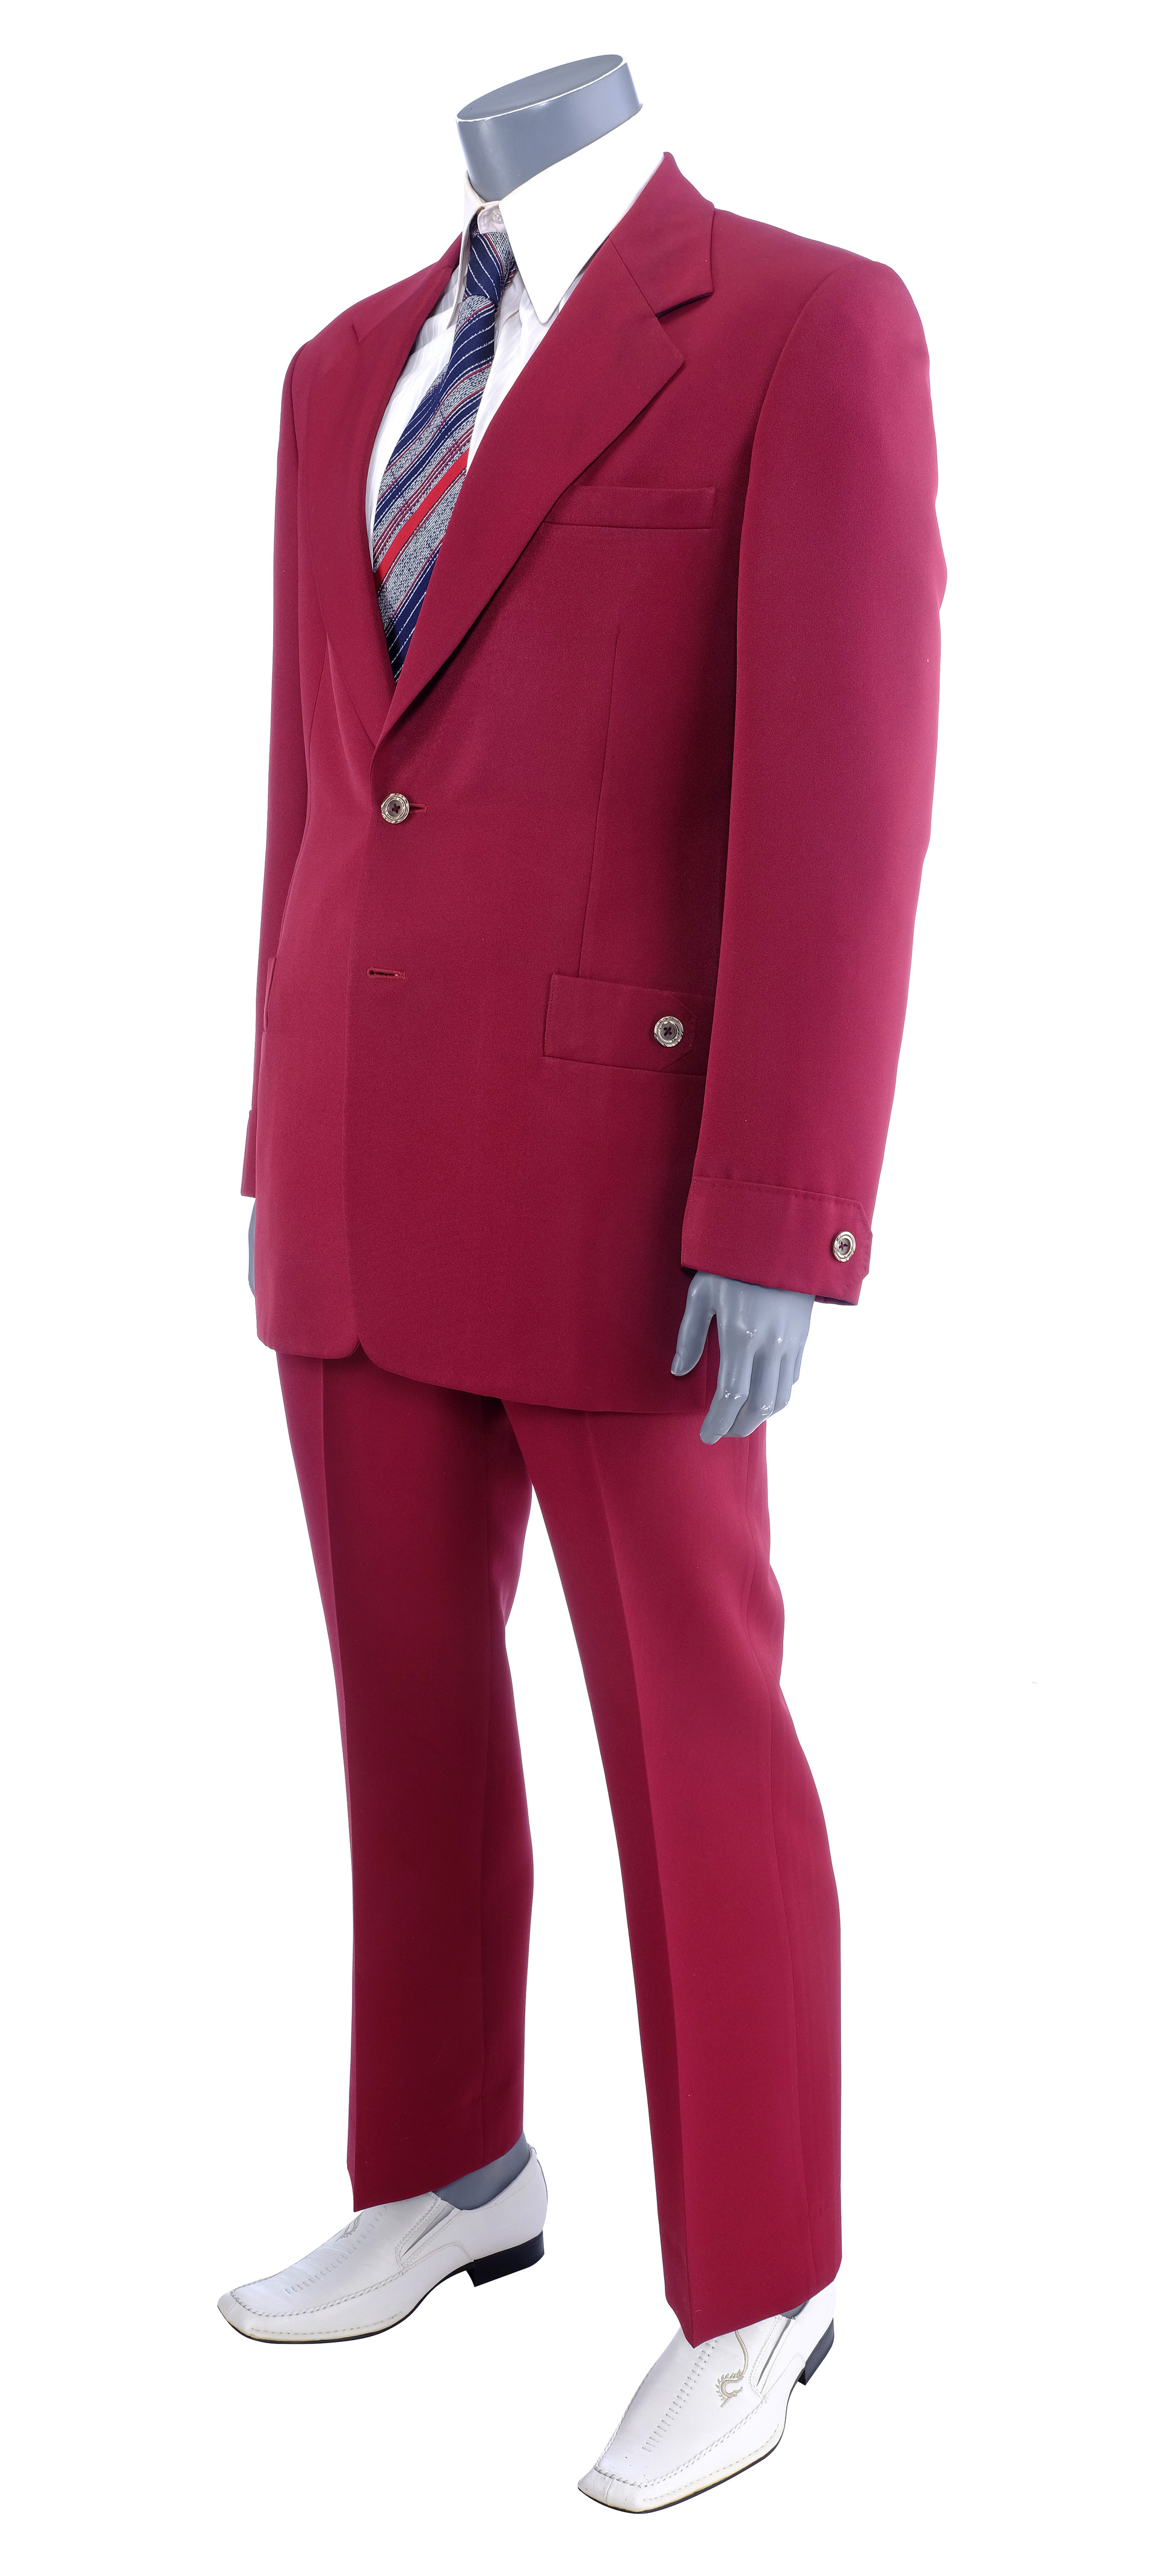 ANCHORMAN: THE LEGEND OF RON BURGUNDY - Ron Burgundy's (Will Ferrell) Suit - Image 3 of 5